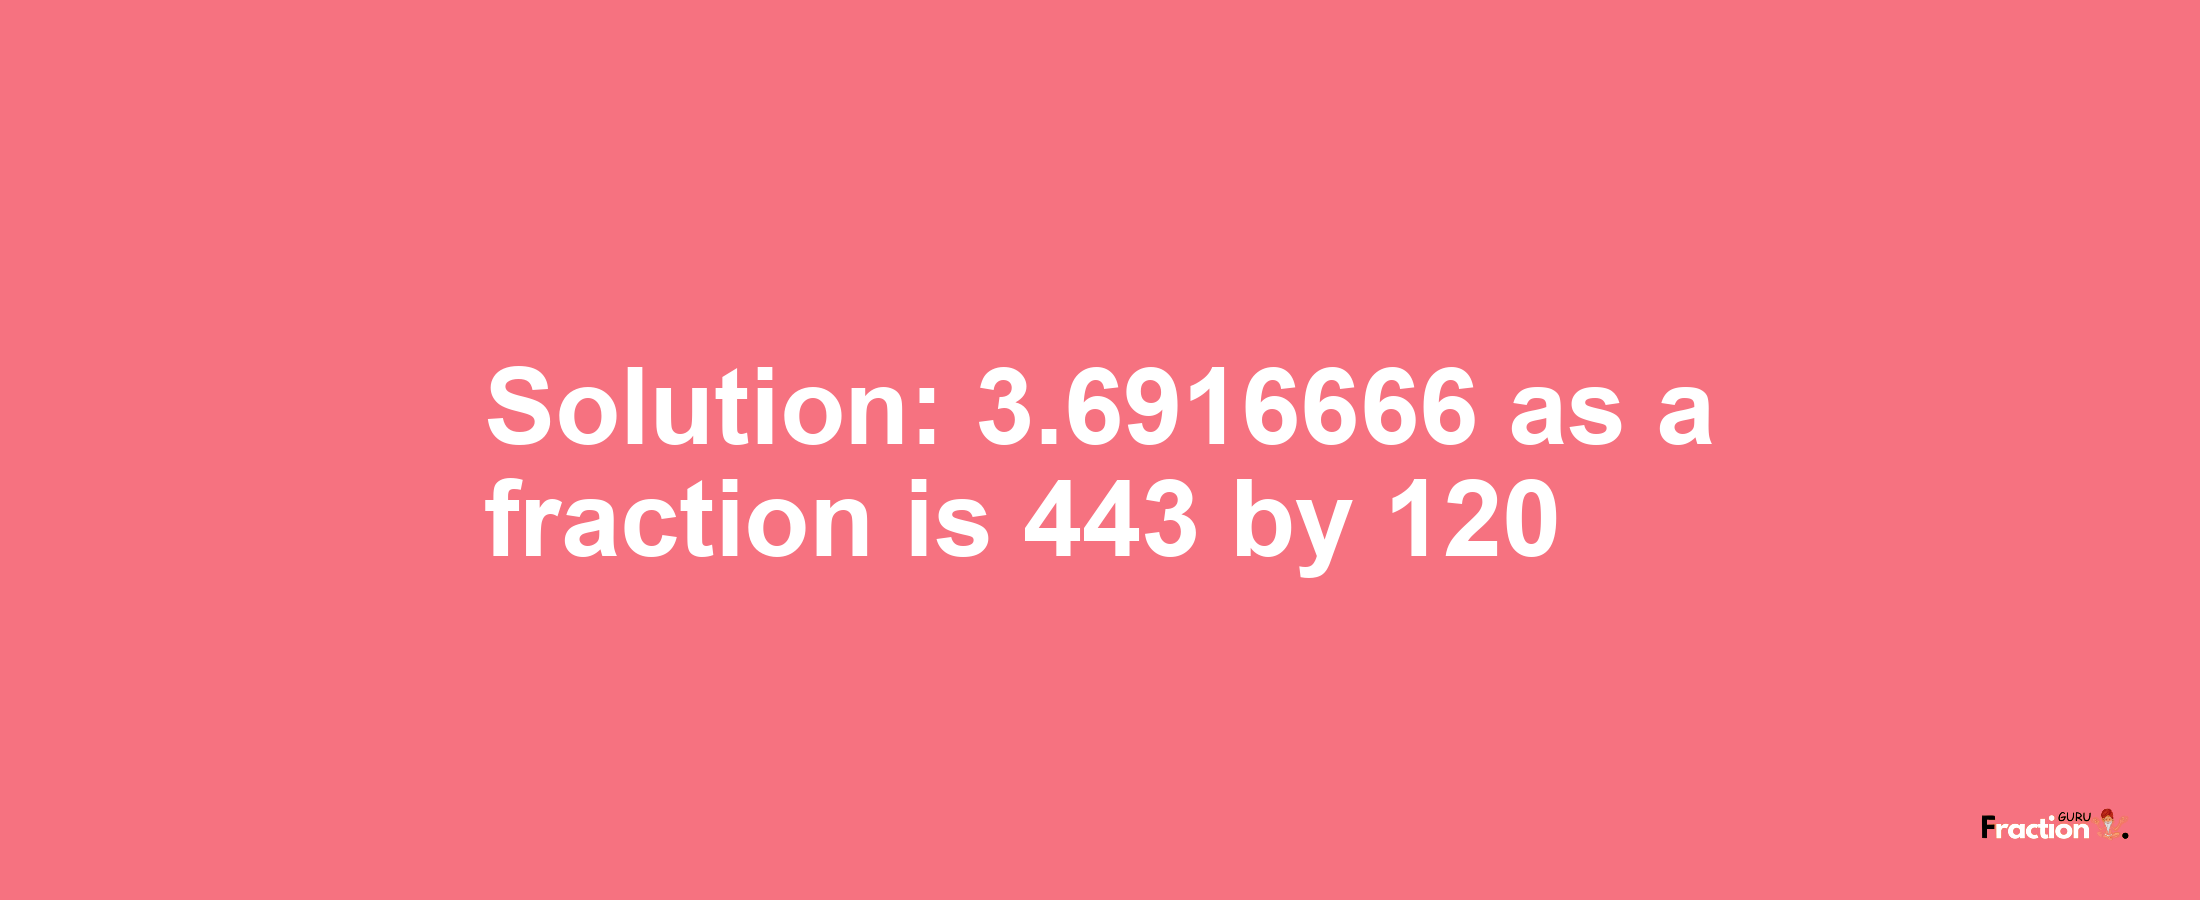 Solution:3.6916666 as a fraction is 443/120